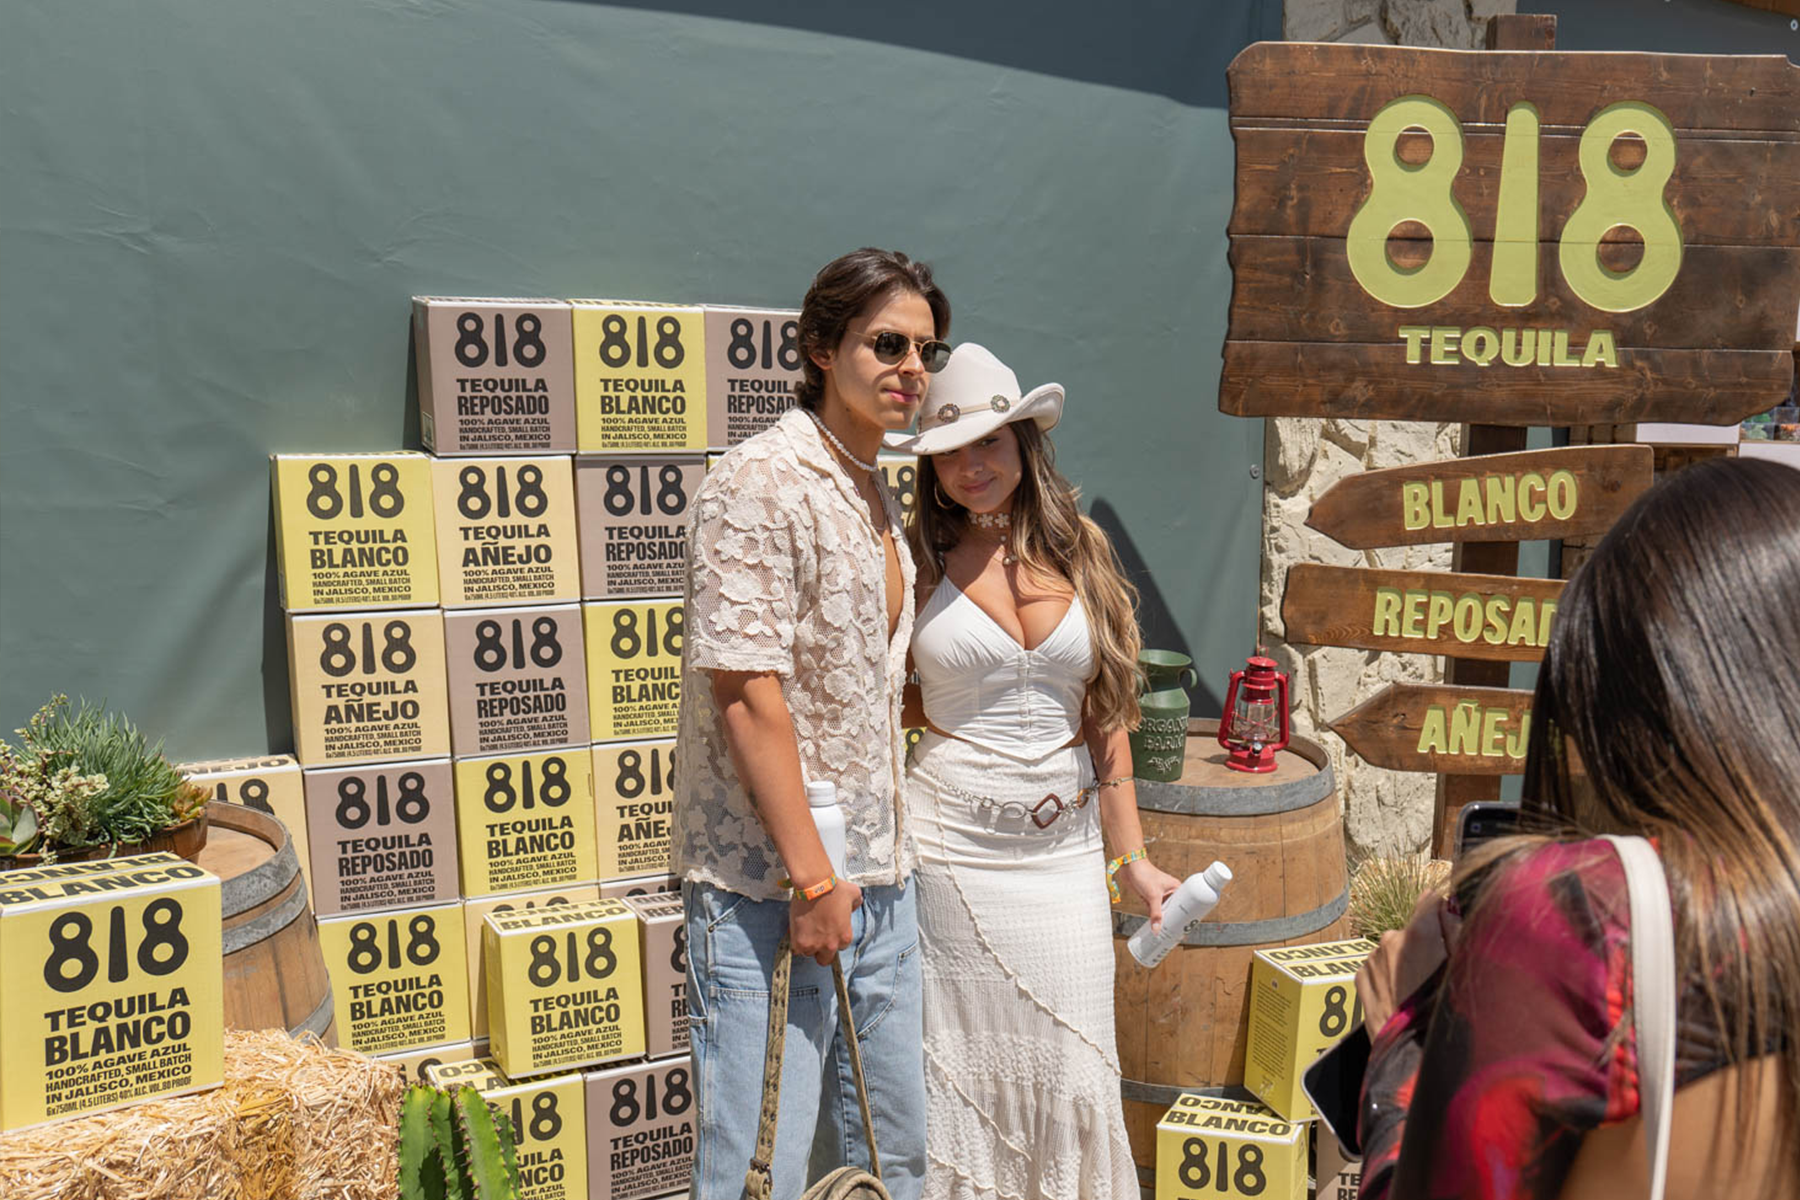 Two people dressed in western clothing in front of a stack of 818 Tequila boxes.